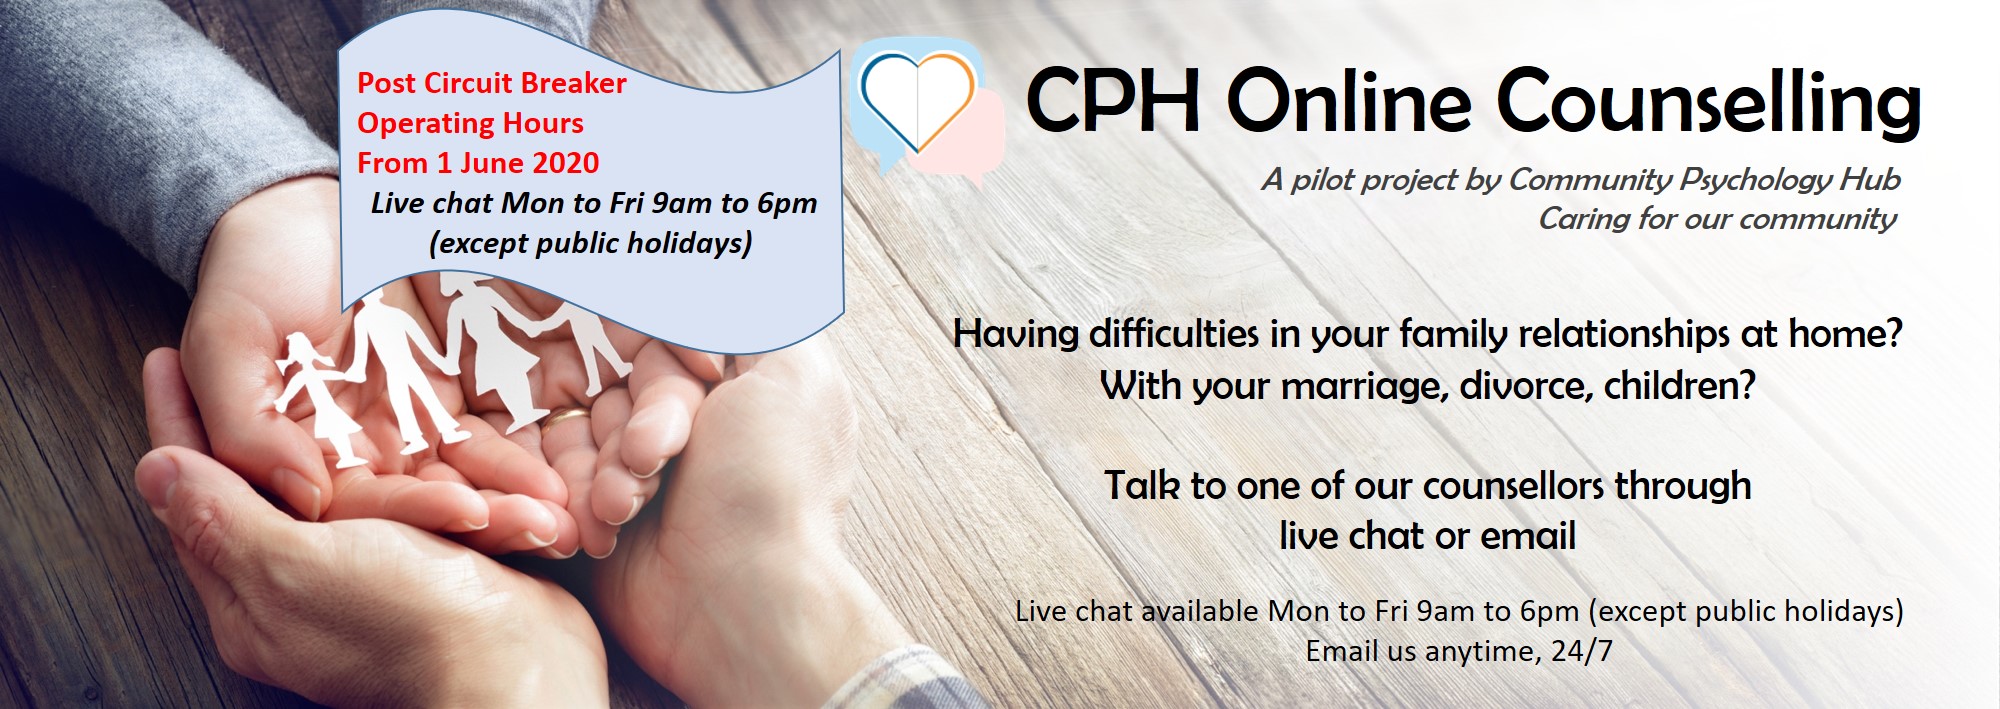 Image of Free-of-Charge Online Counselling Service by CPH